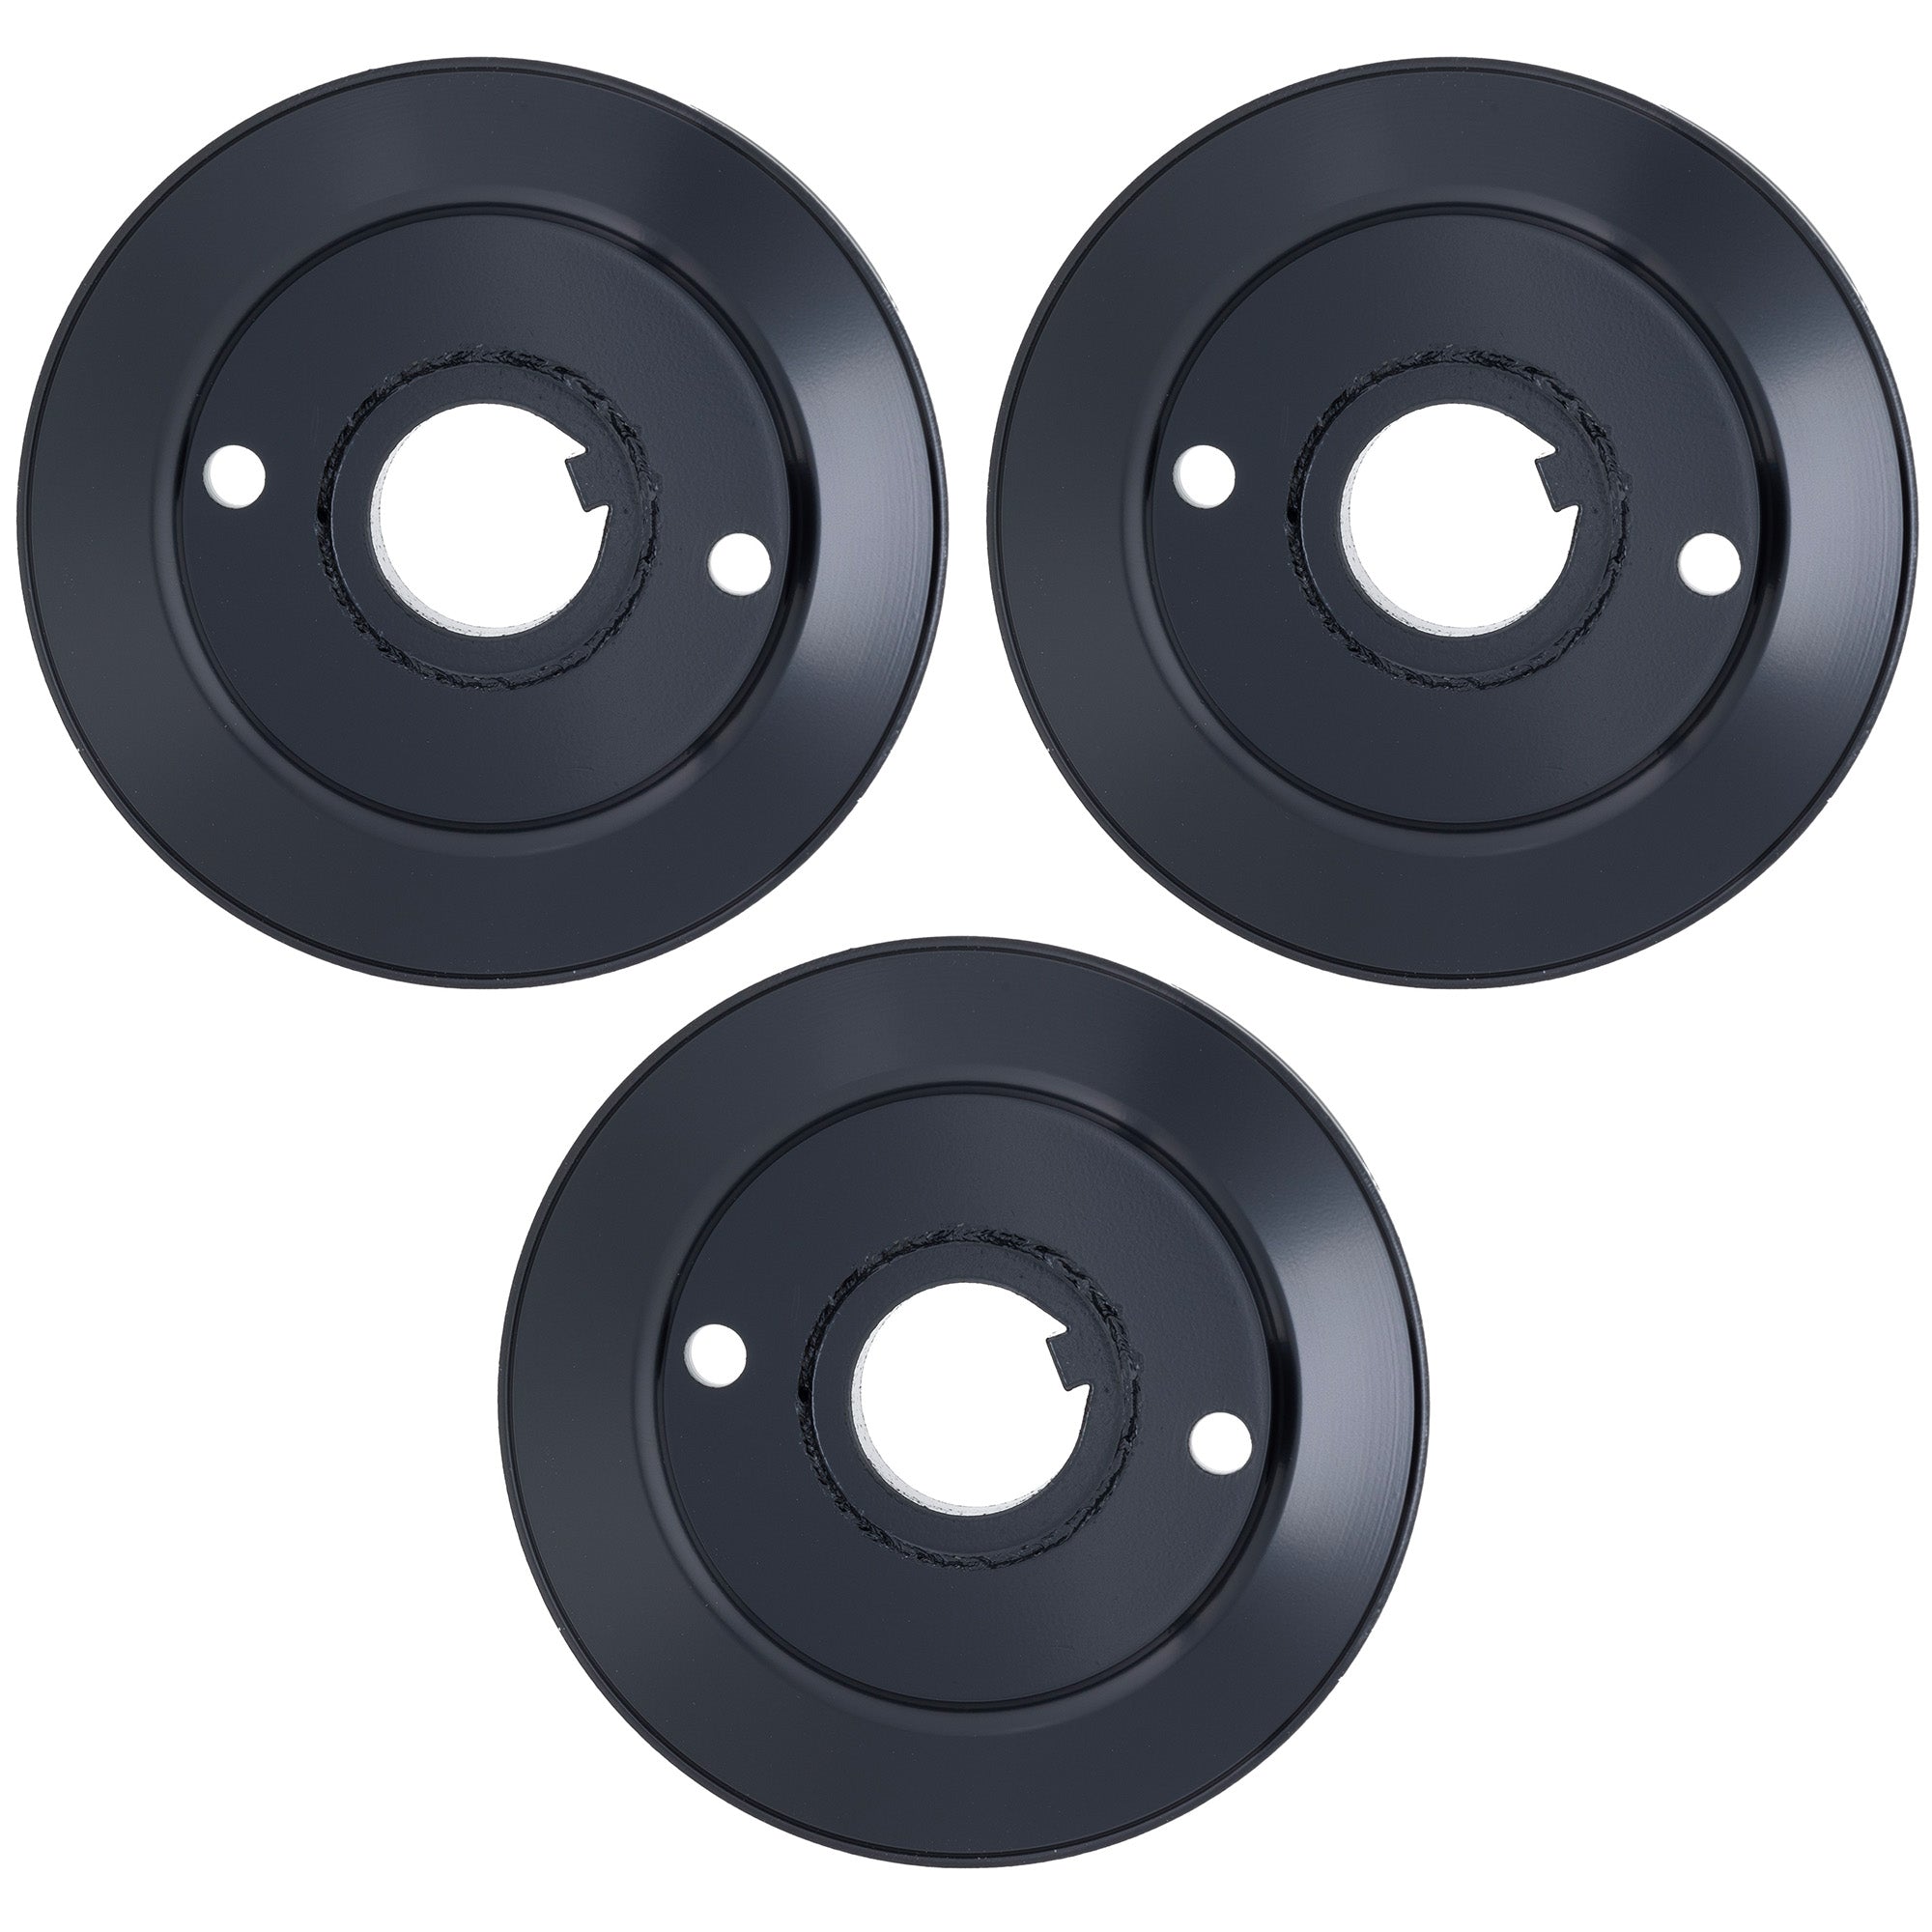 Blade Spindle Belt Pulley Deck Kit For Gravely Ariens MK1010084